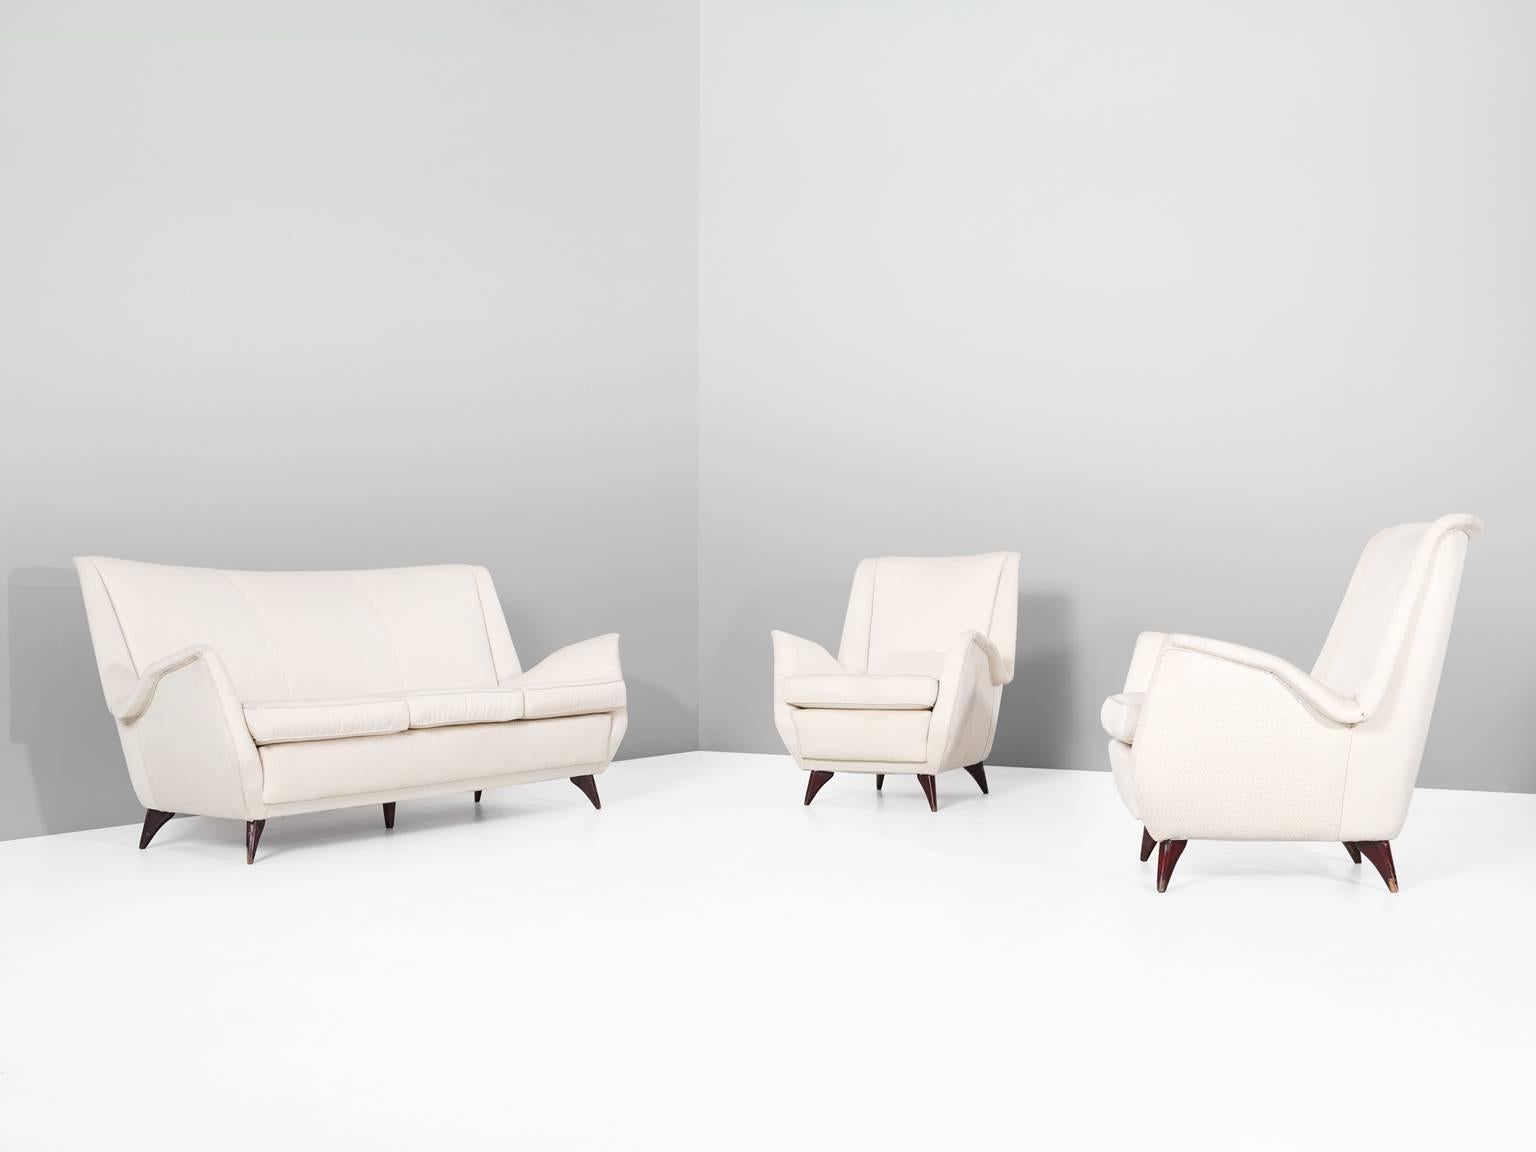 Living room set, in wood and fabric, Italy, 1950s.

Italian living room set in off-white pattern fabric. These items show beautiful and elegant lines. The wide seating is accomplished with nicely folded armrests. The dark stained wooden legs makes